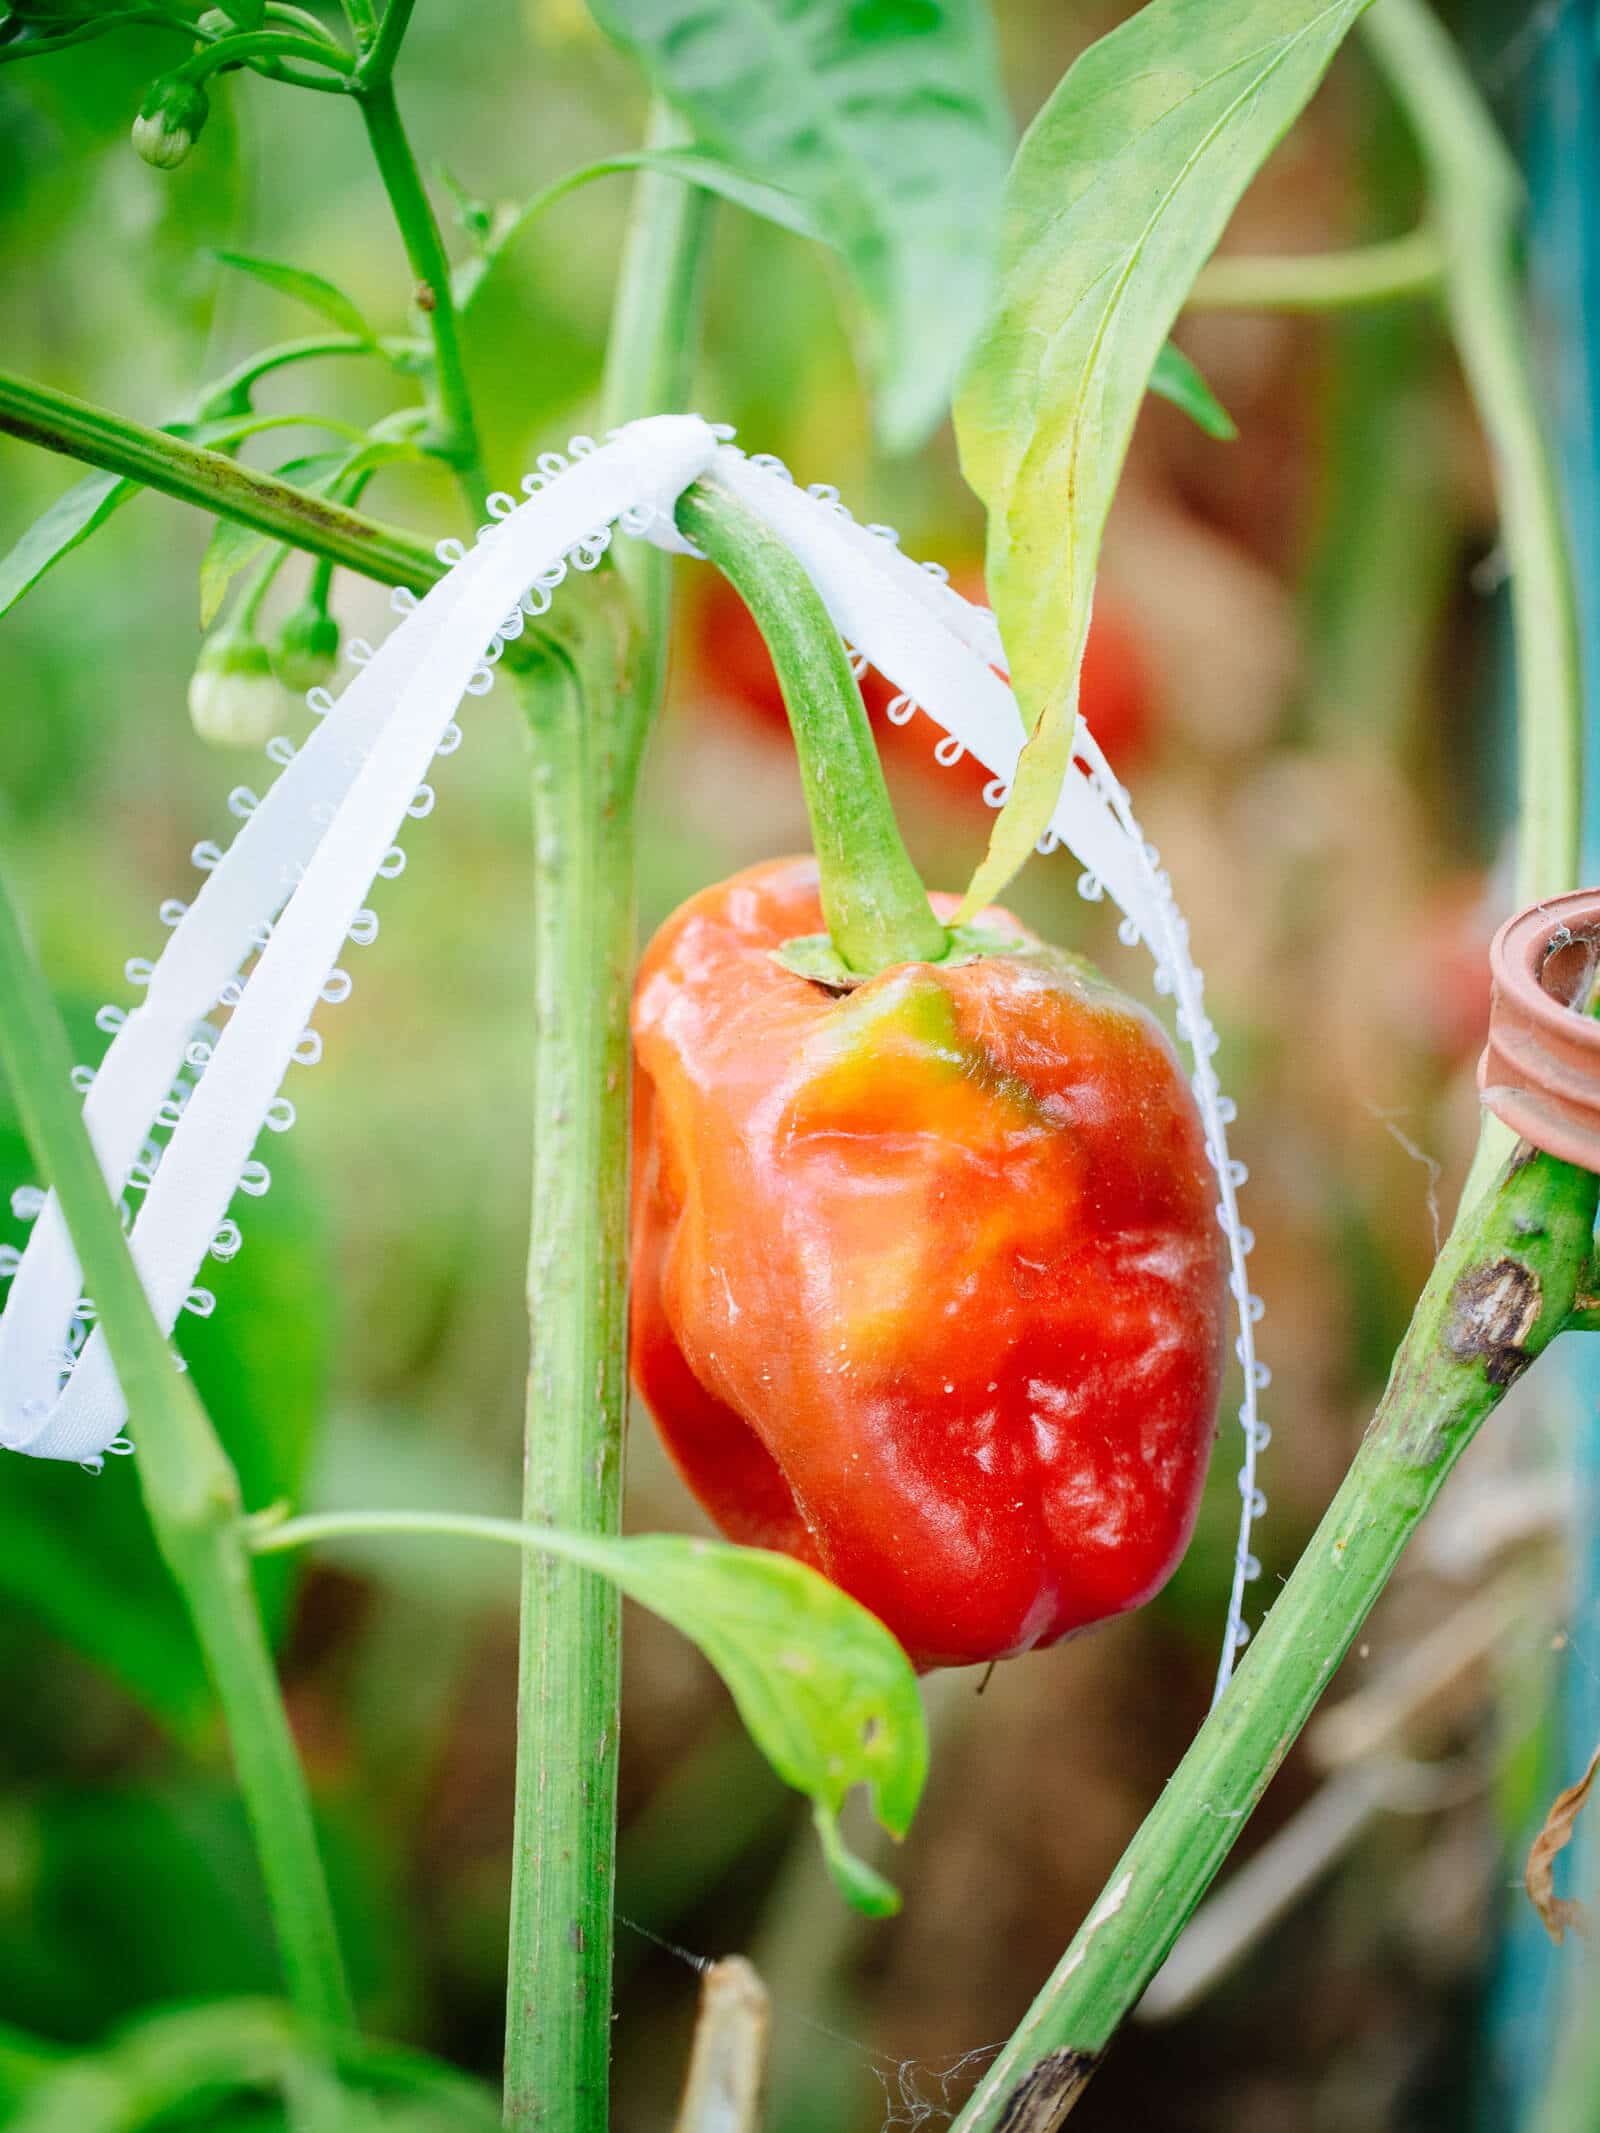 Marking the perfect pepper for seed saving